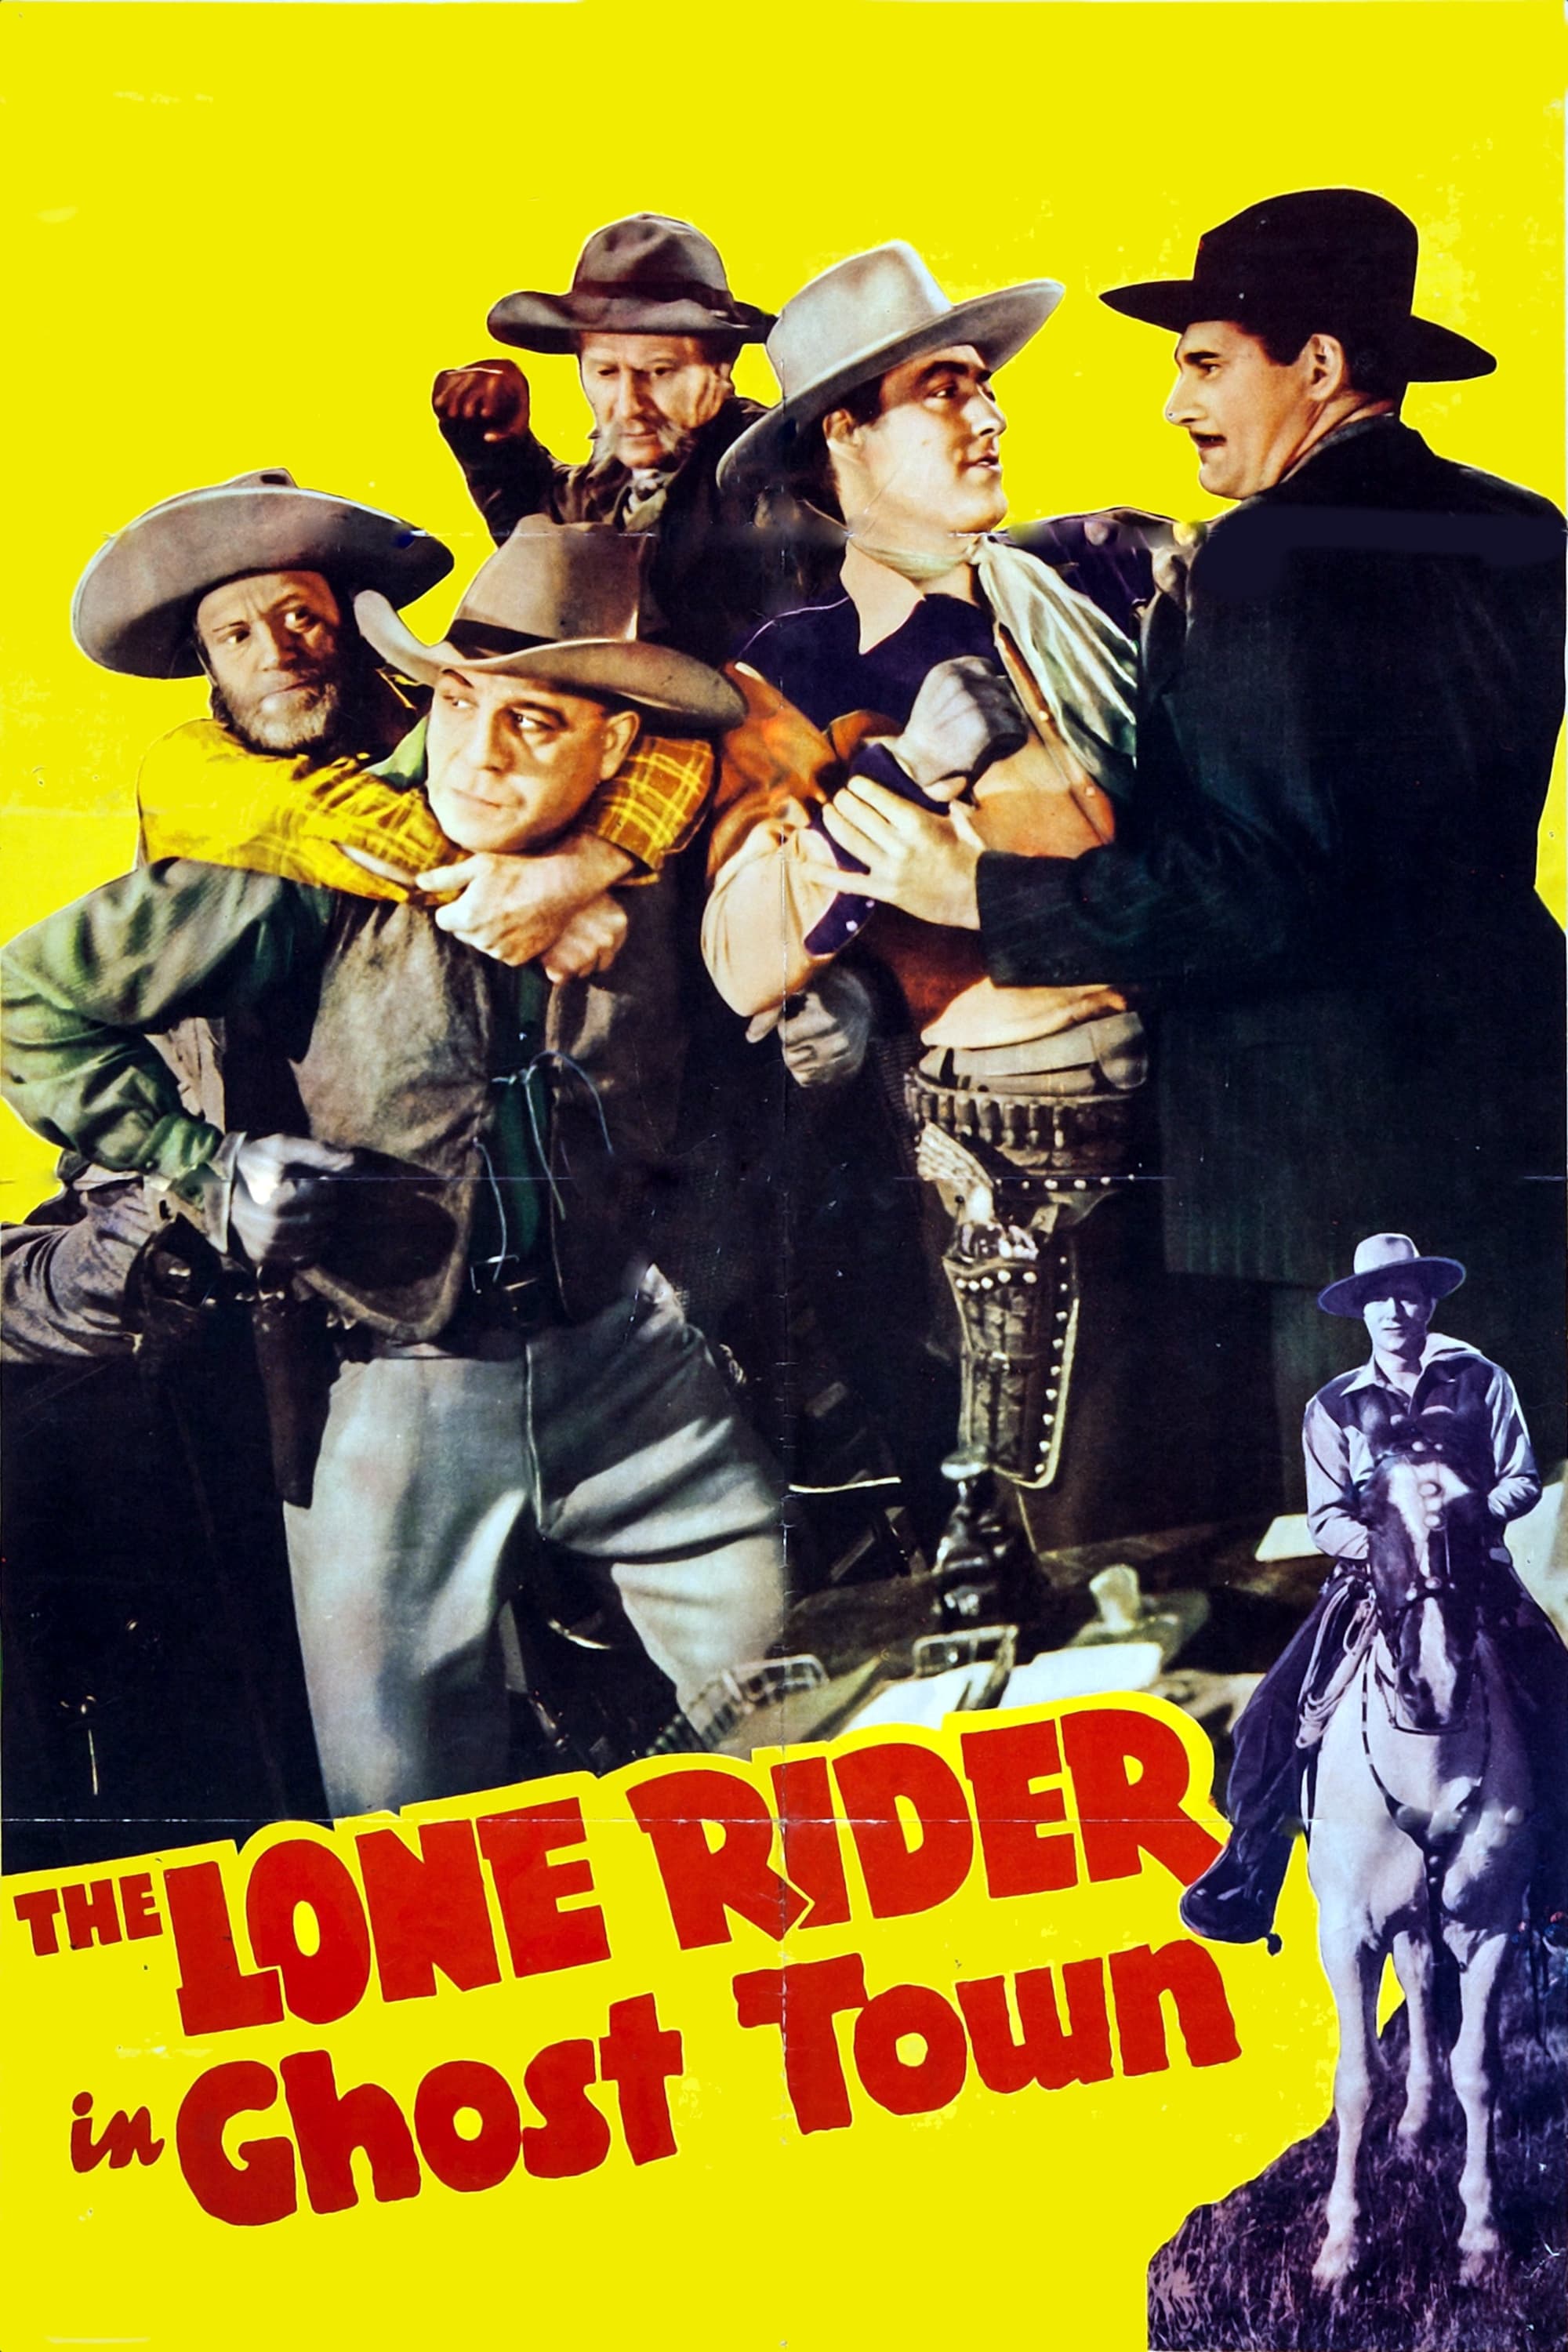 The Lone Rider in Ghost Town (1941)